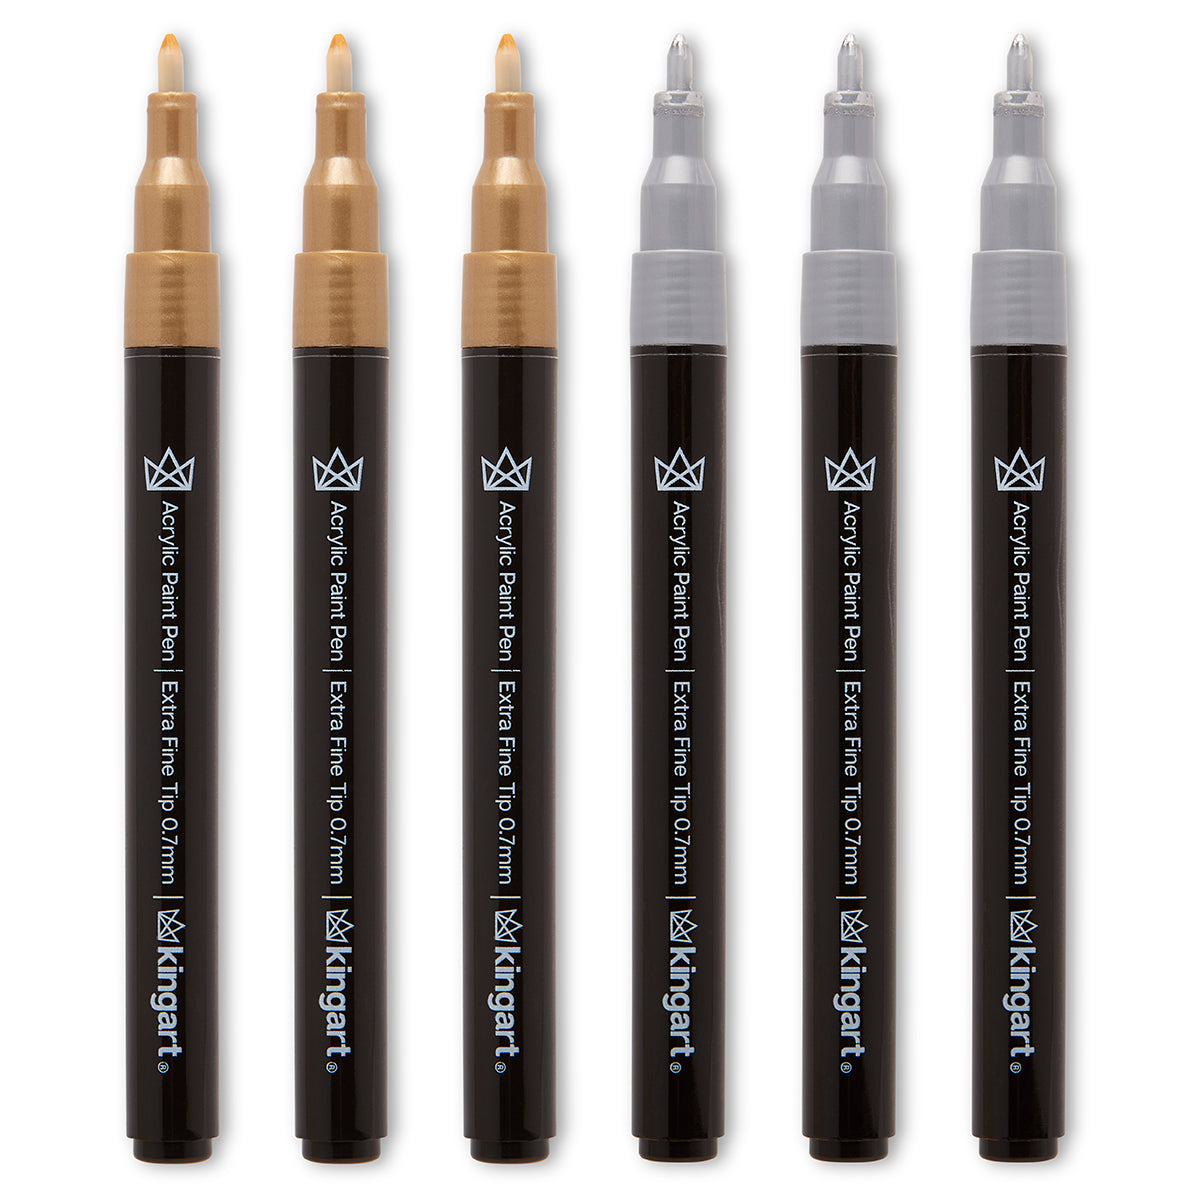 KINGART® Metallic Markers with Travel Case, Set of 6 Colors